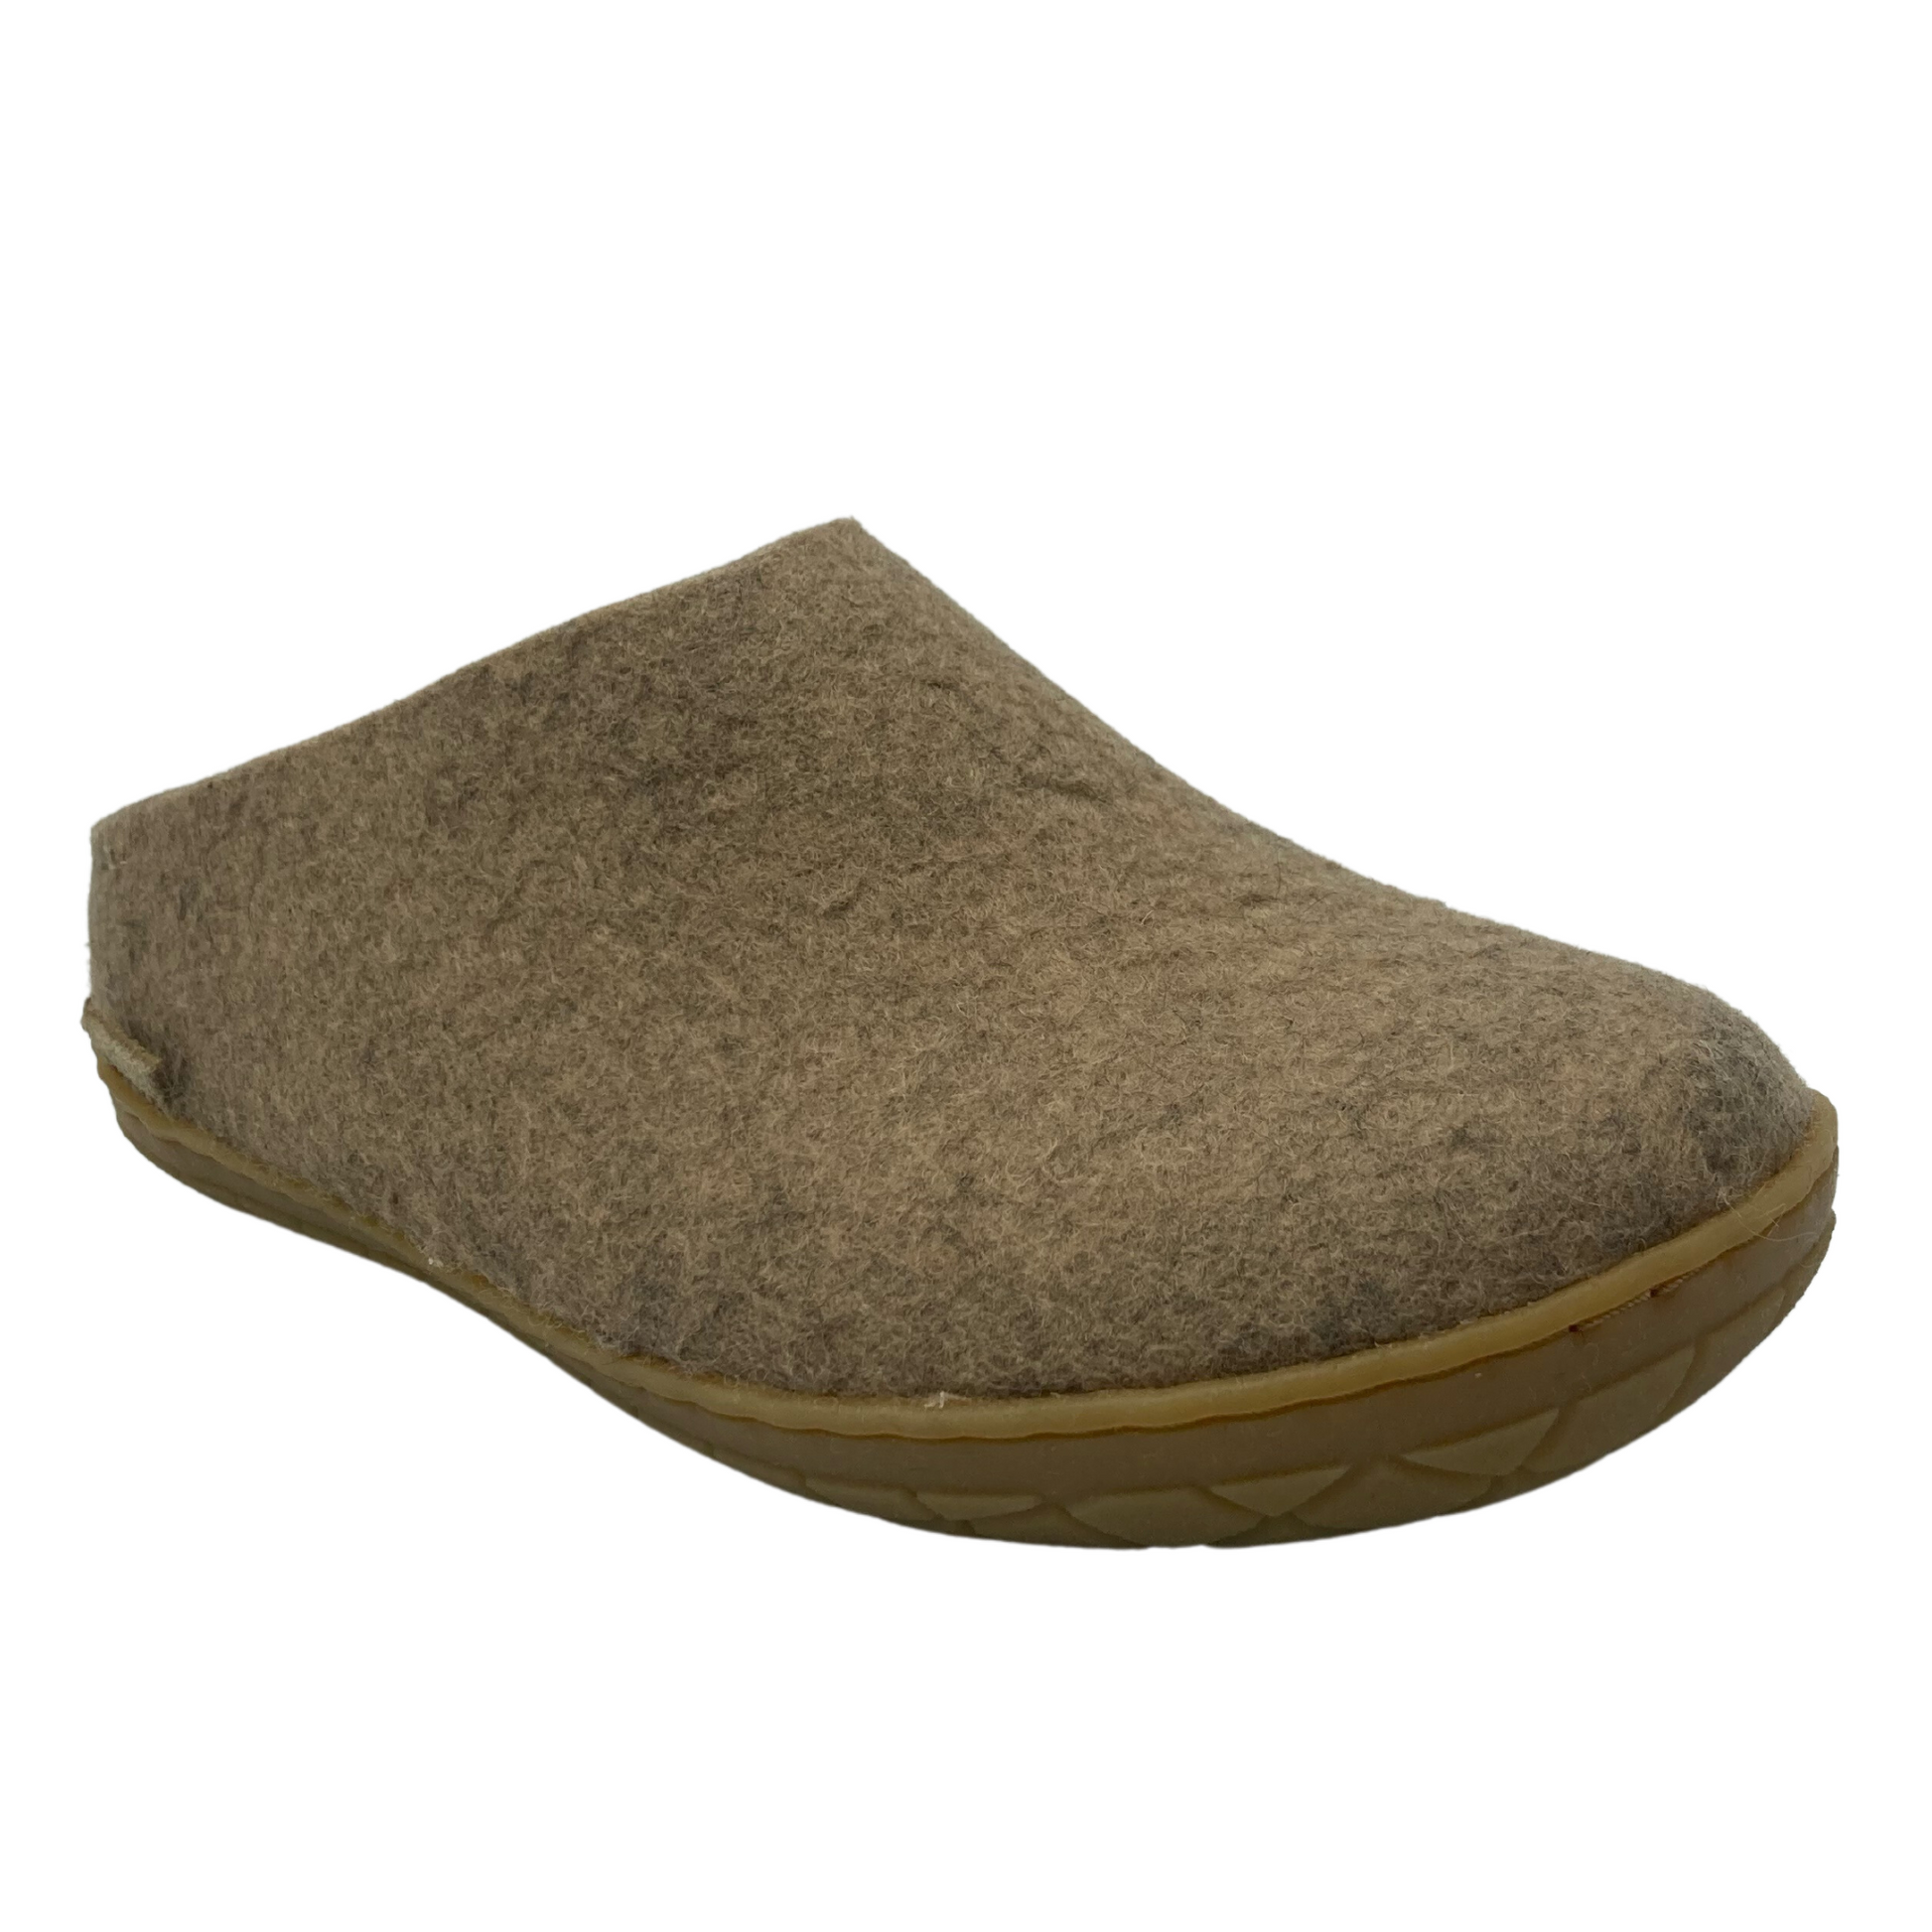 45 degree angled view of felted wool slip on shoe with brown rubber sole